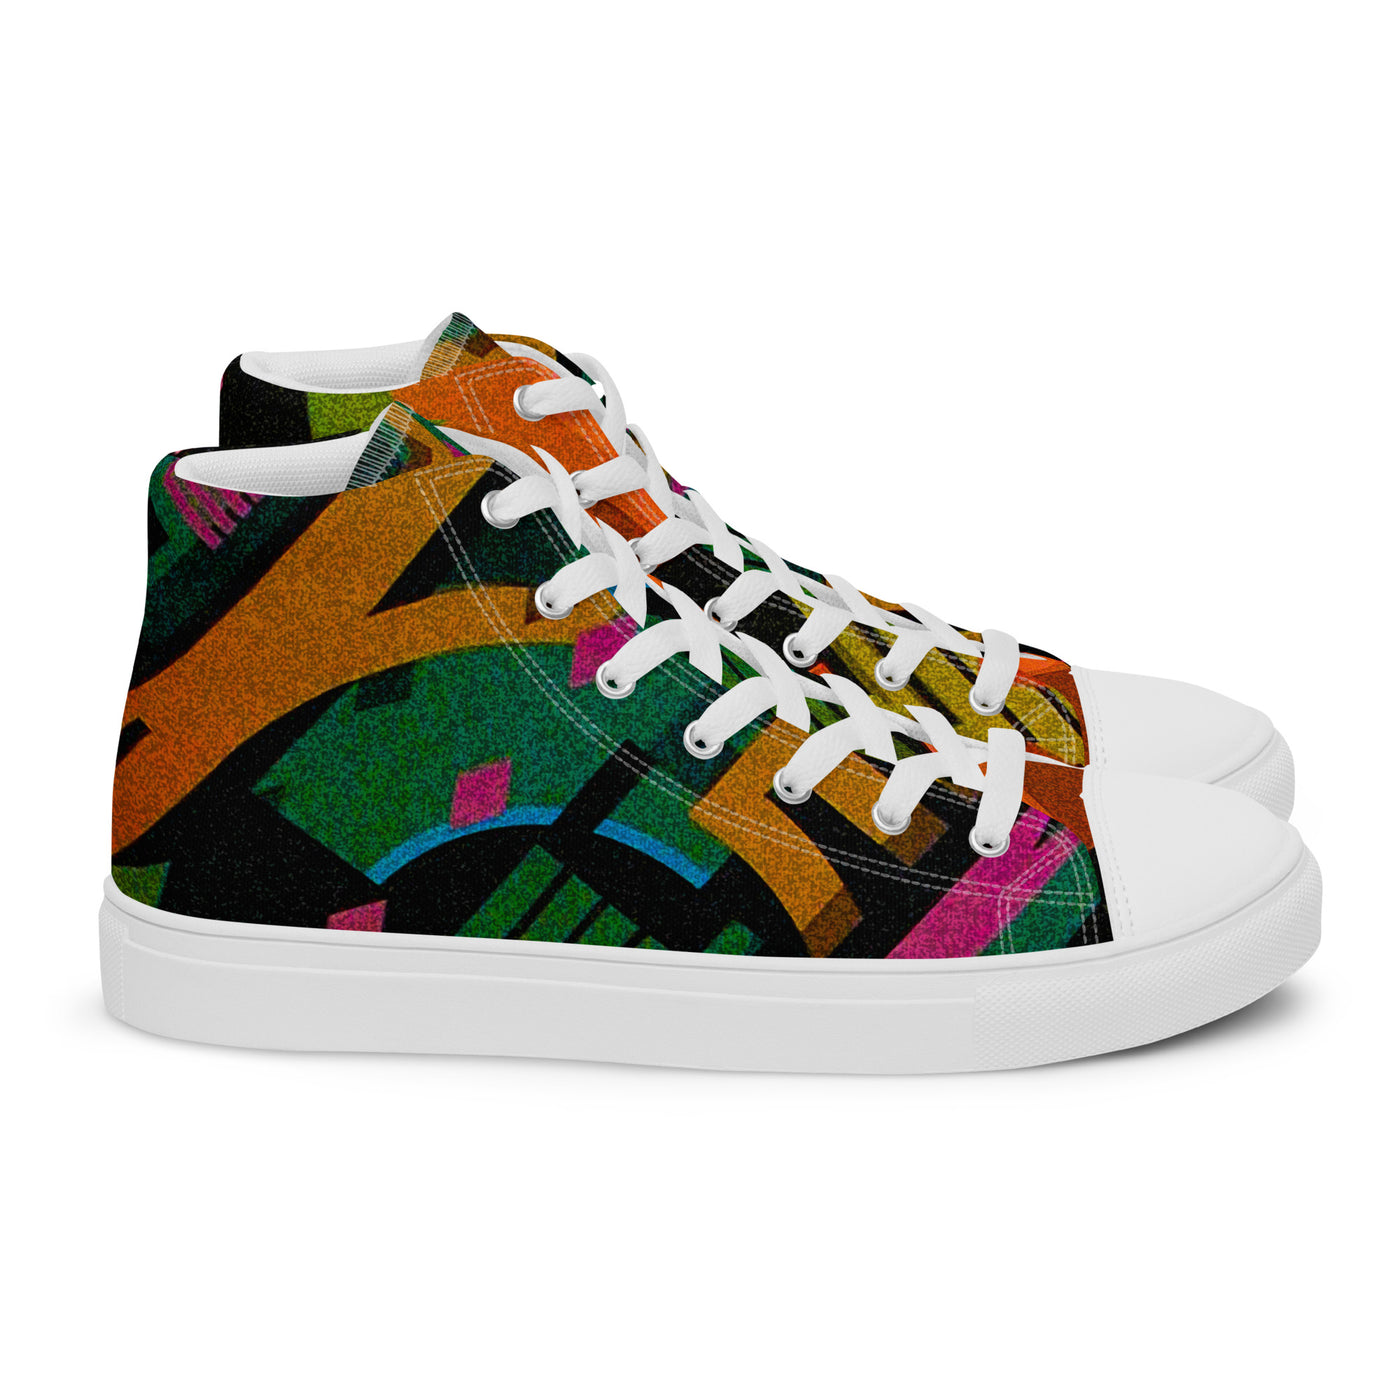 TechAbstract 1 - Women's High Top Canvas Shoes